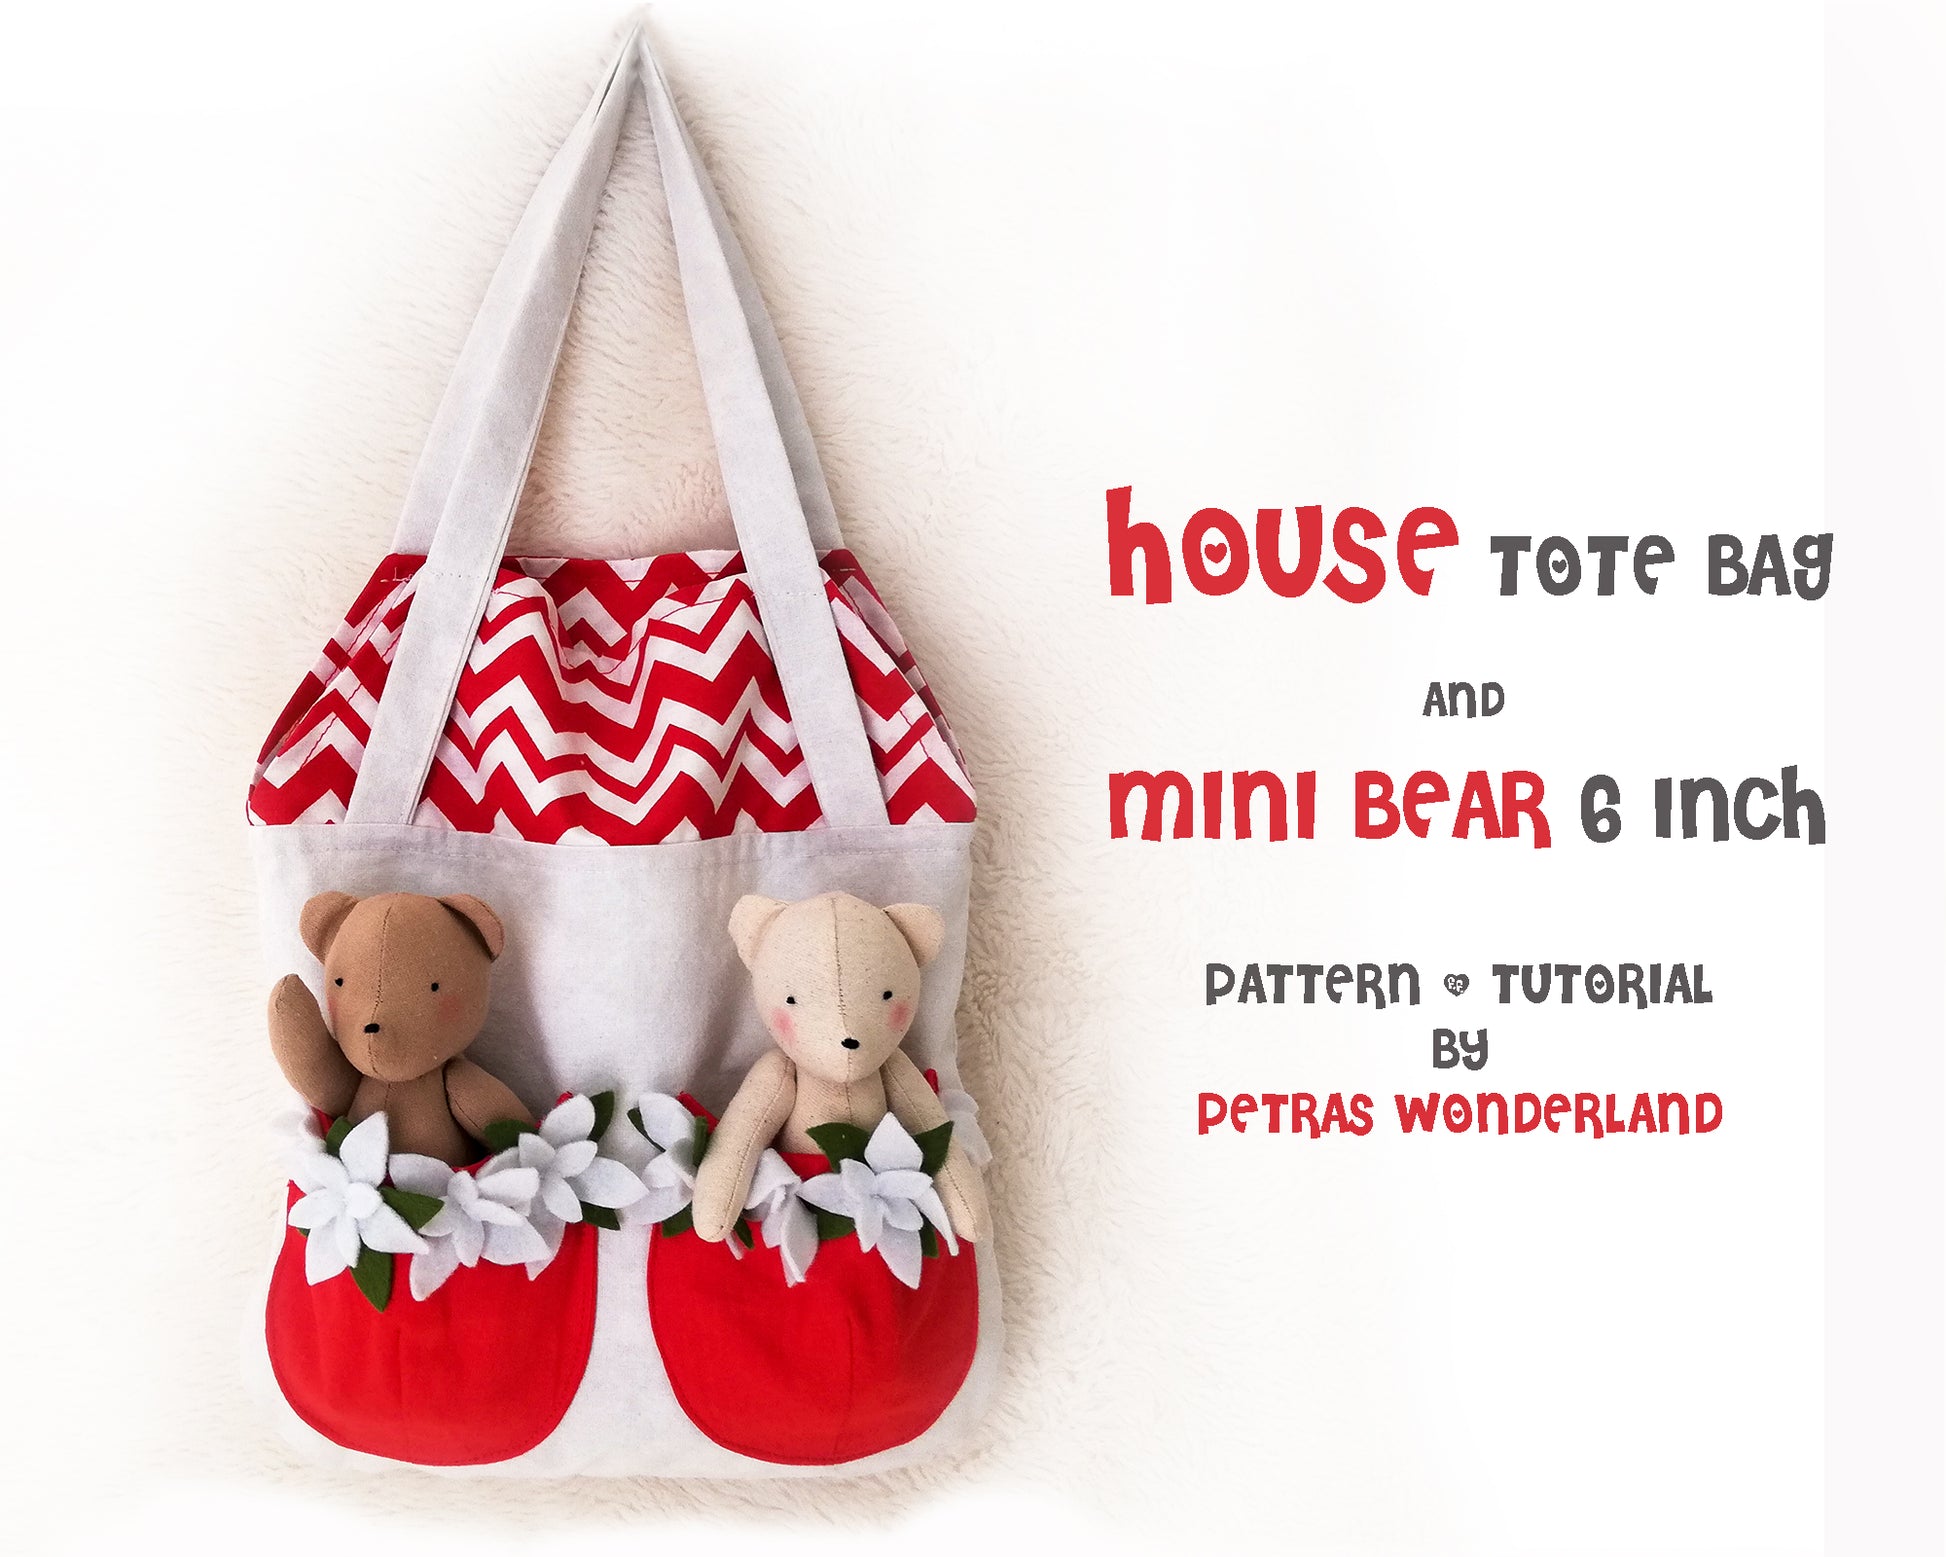 Set of 2 PDF Mini Bear and House Tote Bag - PDF doll sewing pattern and tutorial